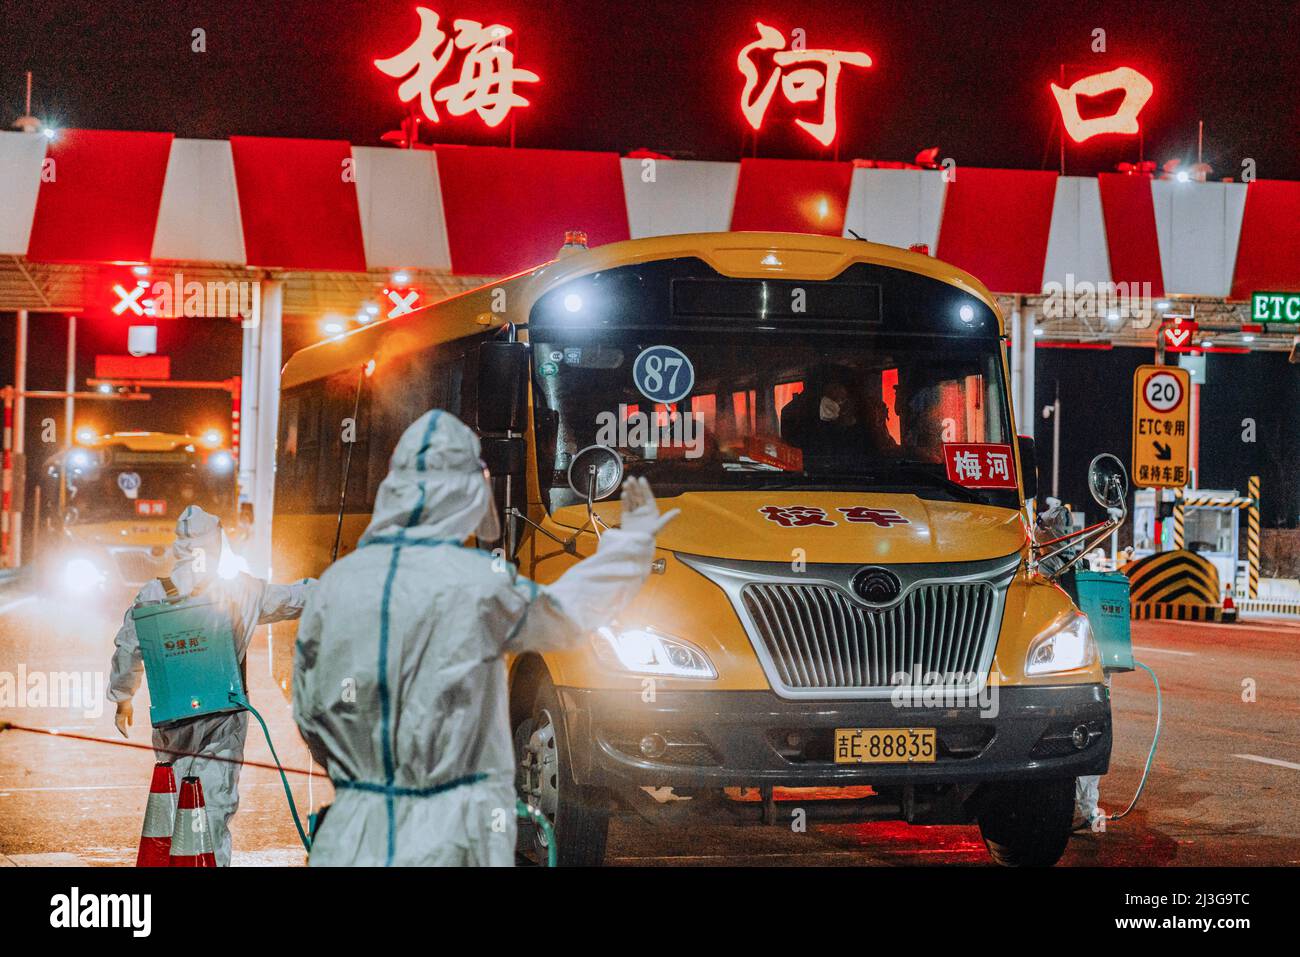 (220408) -- CHANGCHUN, April 8, 2022 (Xinhua) -- Staff members disinfect school buses transporting supportive team members from Changchun in Meihekou City, northeast China's Jilin Province, April 3, 2022. Some 5,000 supportive staff from Meihekou City who are aiding Changchun, one of the hardest-hit cities in China amid the latest virus resurgence, commute between the two cities every day in order to lessen boarding and lodging burdens on Changchun. The supportive team members, including medics, government officials and police officers, start off early morning and get back in late night, both Stock Photo